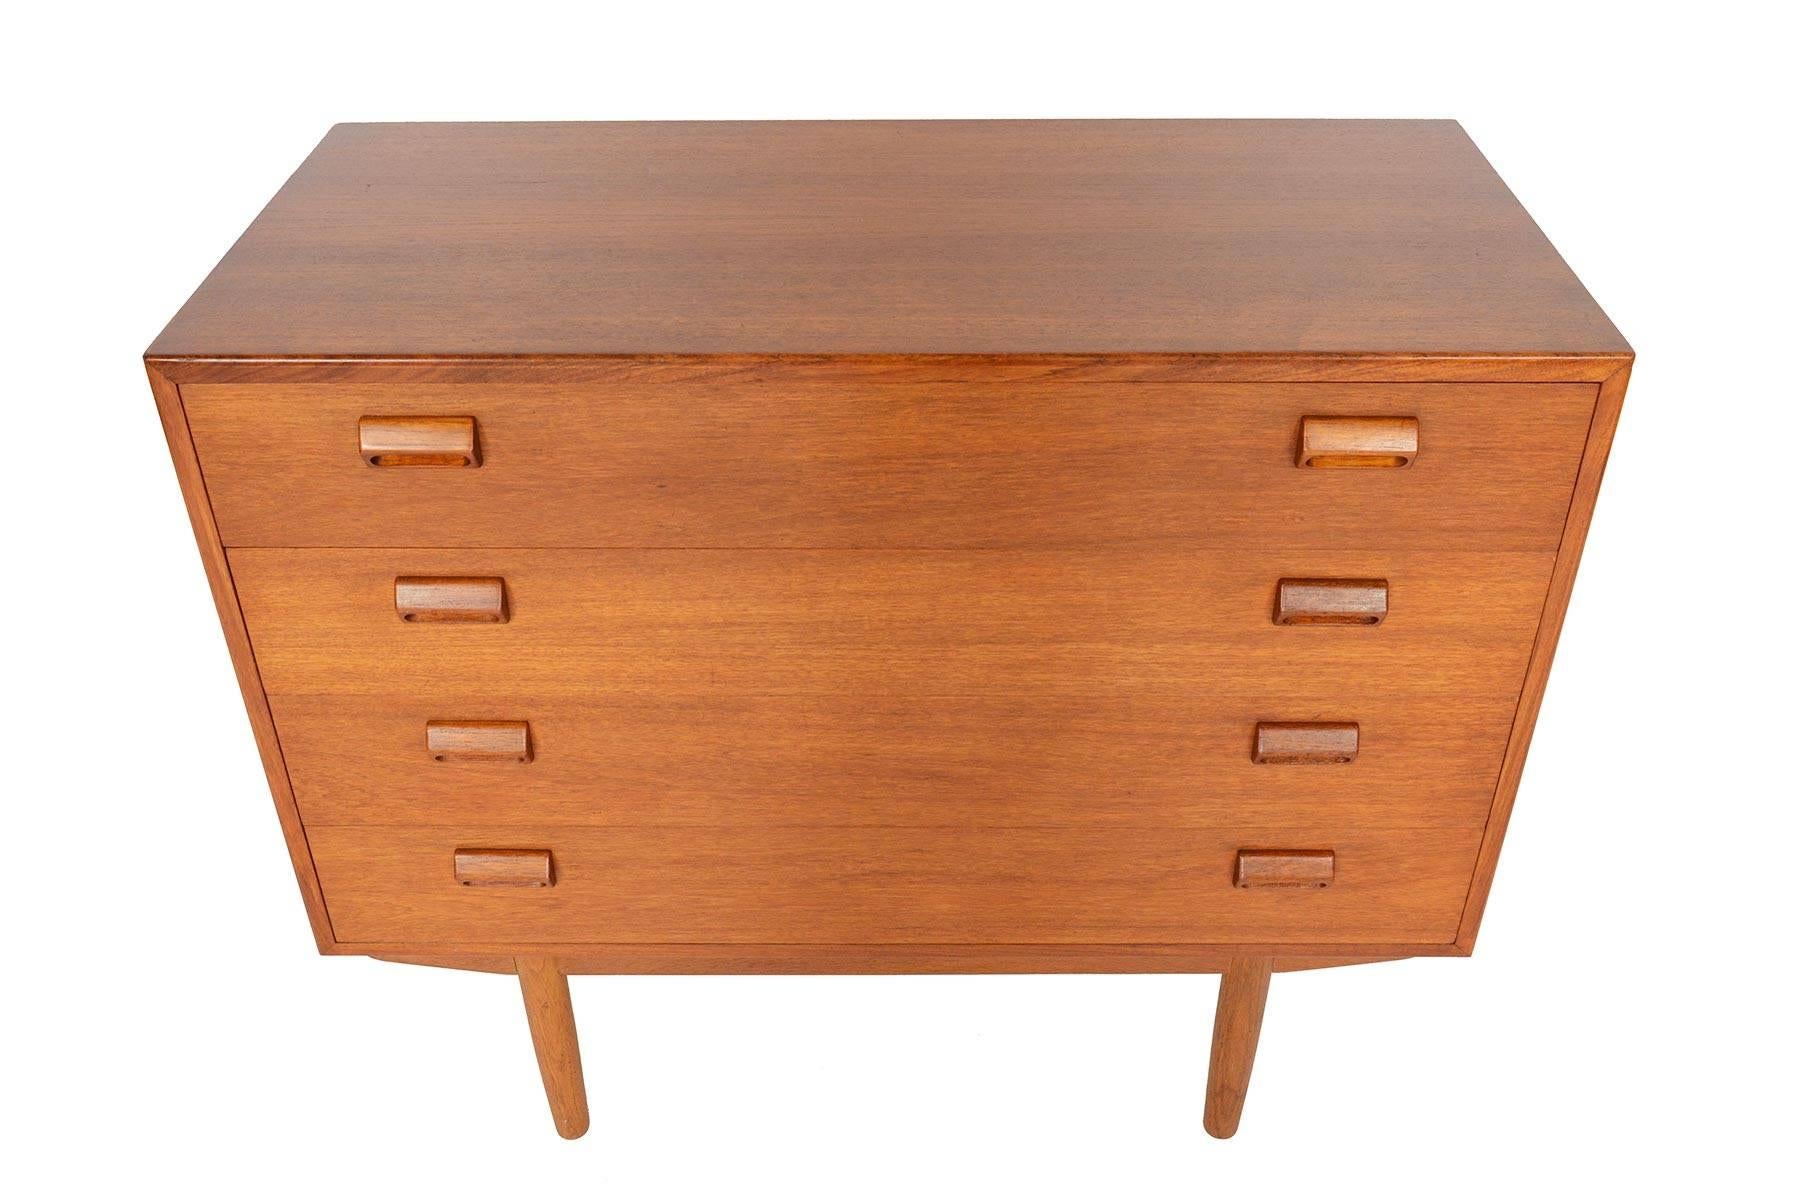 This beautiful gentleman's chest was designed by Børge Mogensen for Søborg Møbelfabrik in 1951. The case is expertly crafted in teak and stands on a solid oak base. Each drawer front is adorned with the designer's signature handles. Four deep